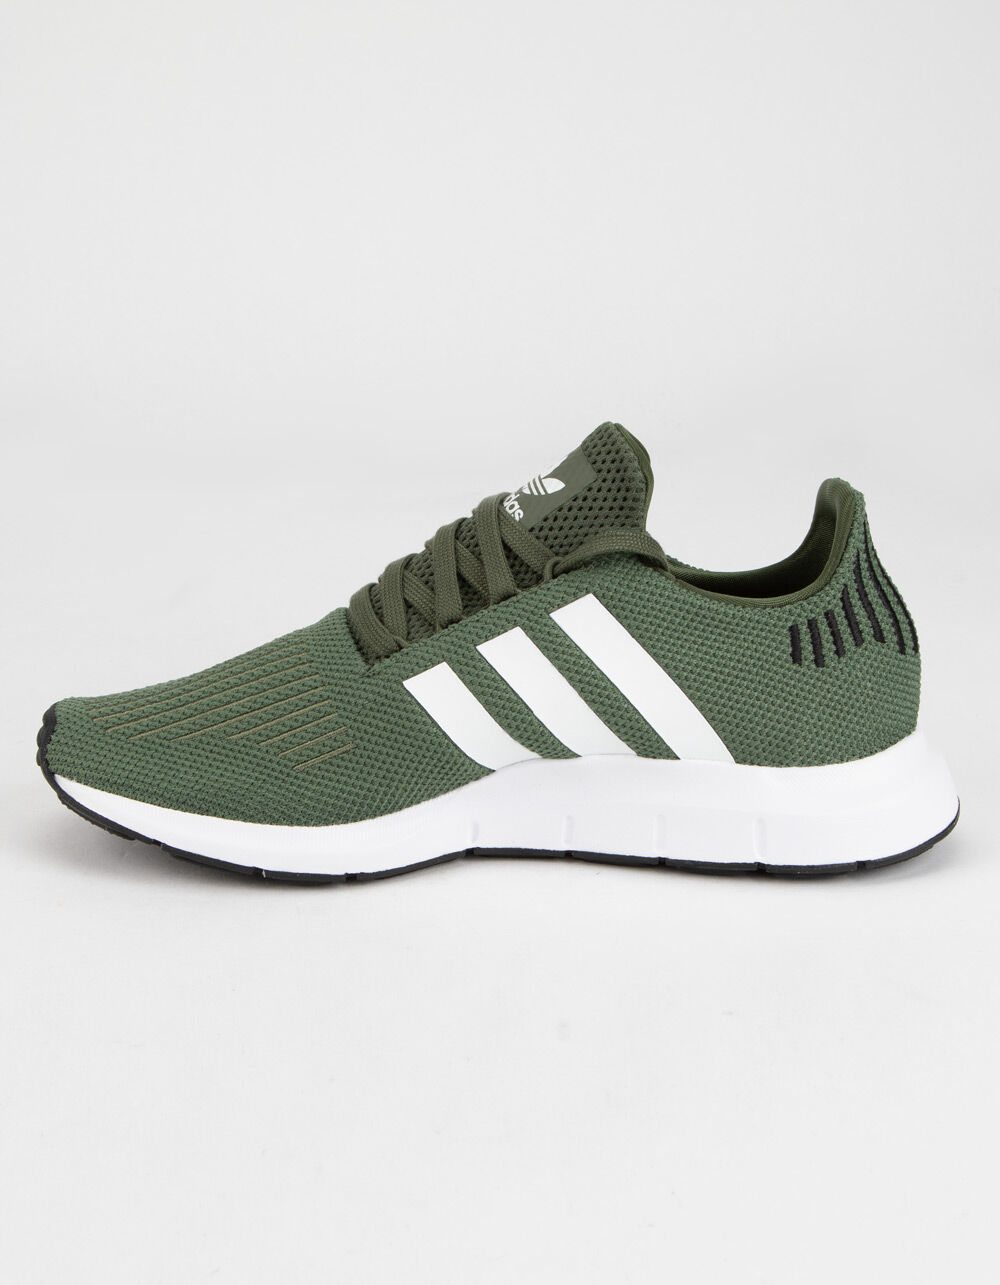 ADIDAS Swift Run Olive Womens Shoes - OLIVE | Tillys